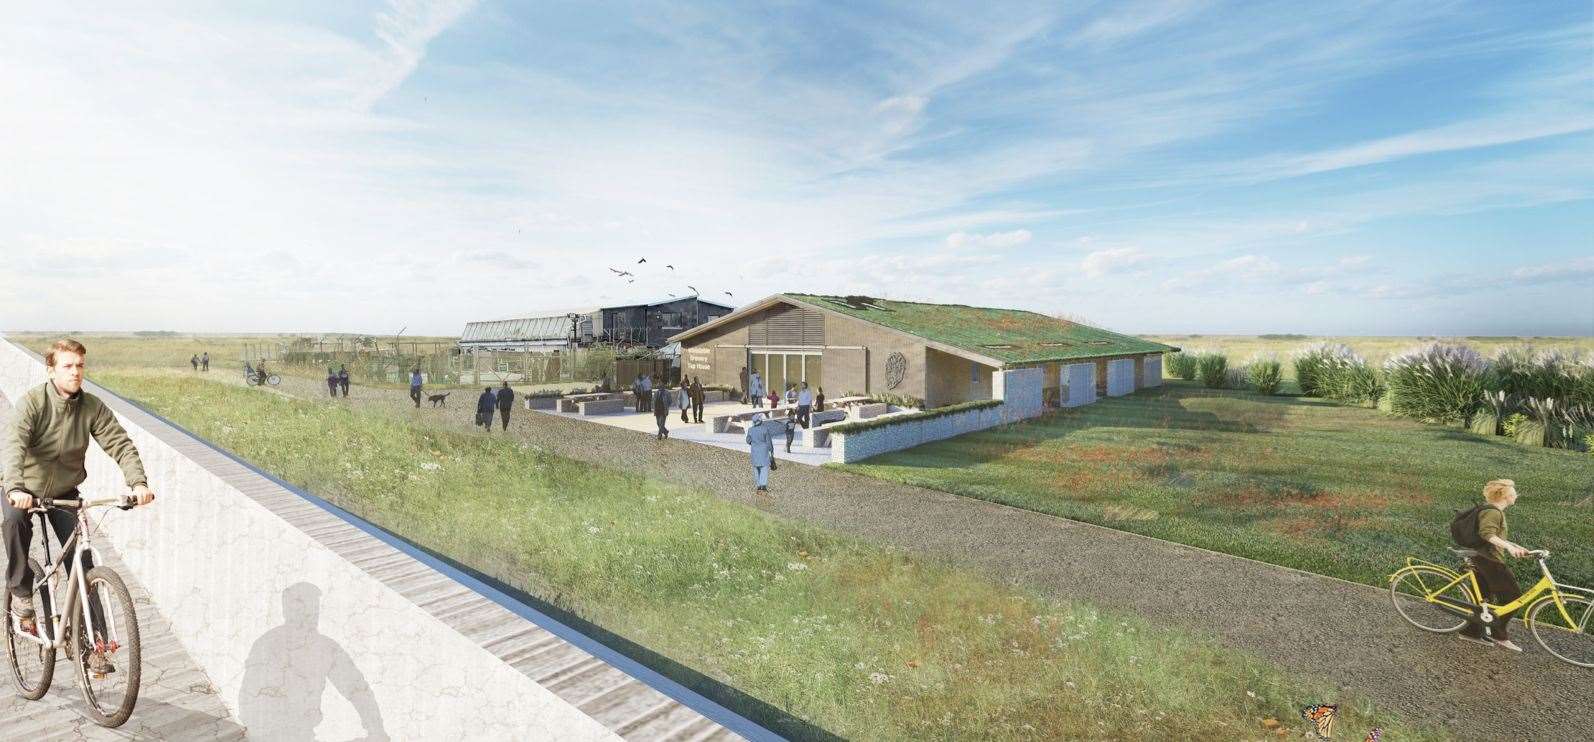 An artist’s impression of how the microbrewery enterprise at Reculver could look. Picture: Lee Evans Partnership